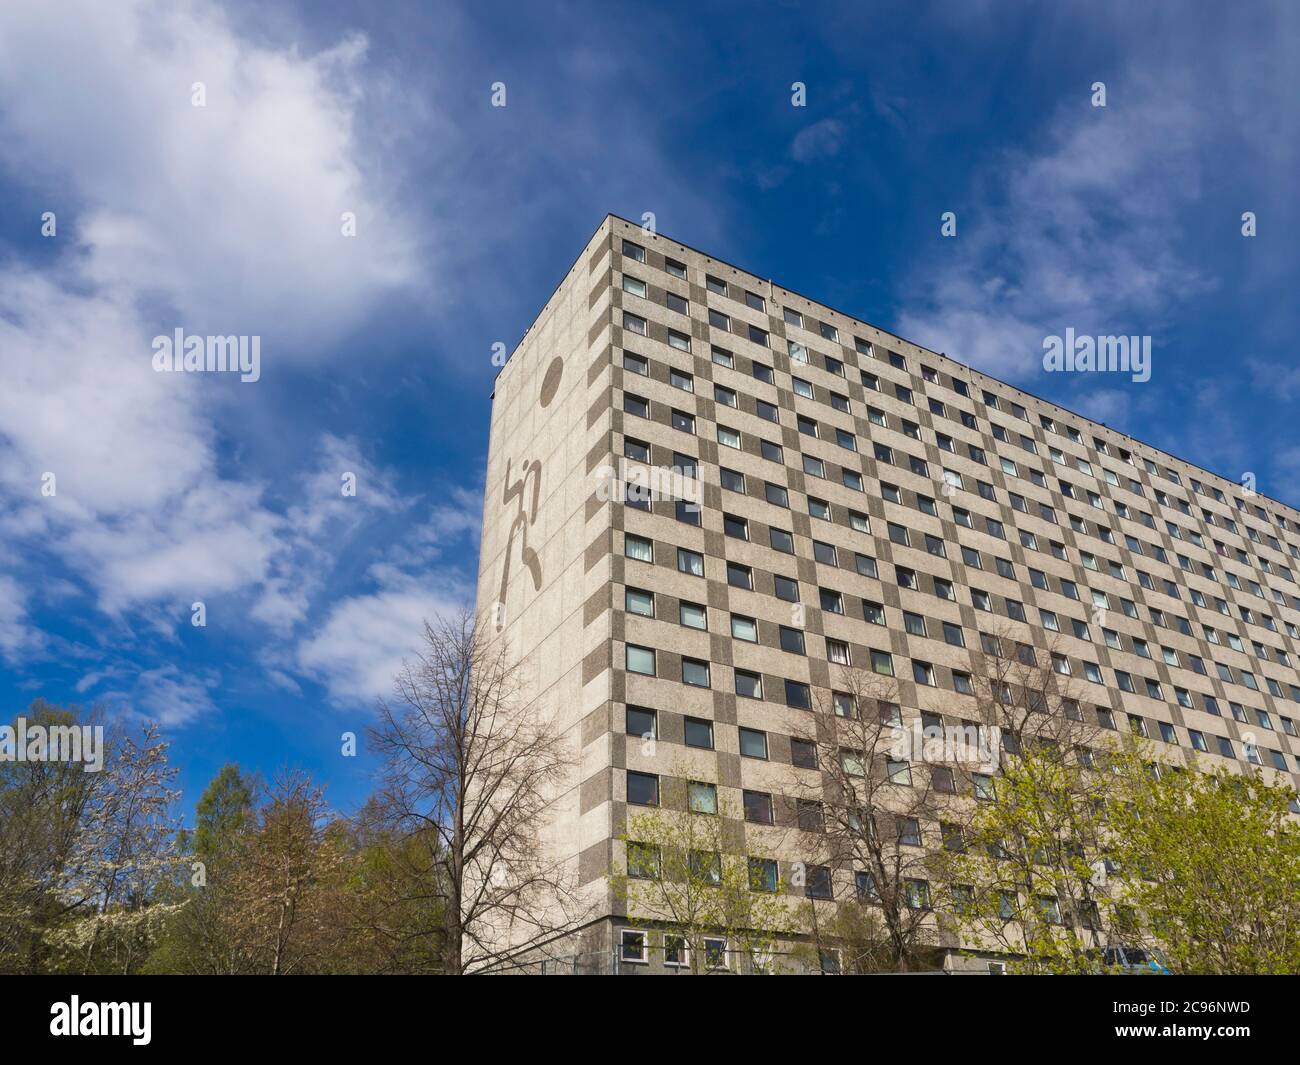 Looking up at a massive block of flats with a decorative end wall, a landmark in the suburb of Ammerud in Oslo Norway Stock Photo